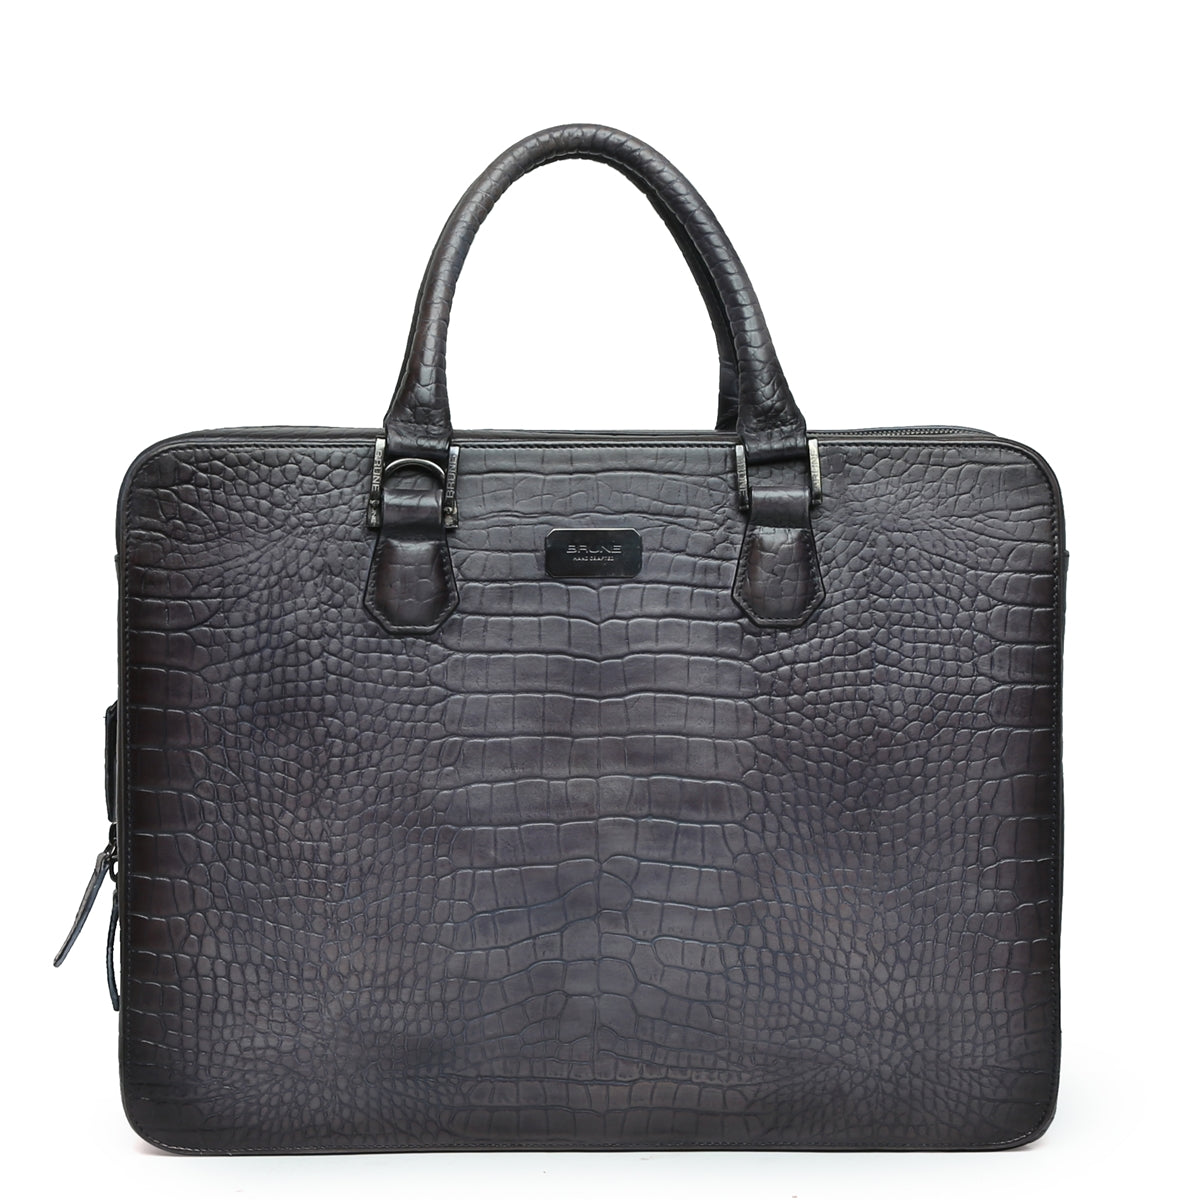 Grey Laptop Briefcase in Cut Croco Leather with Organizer Compartment